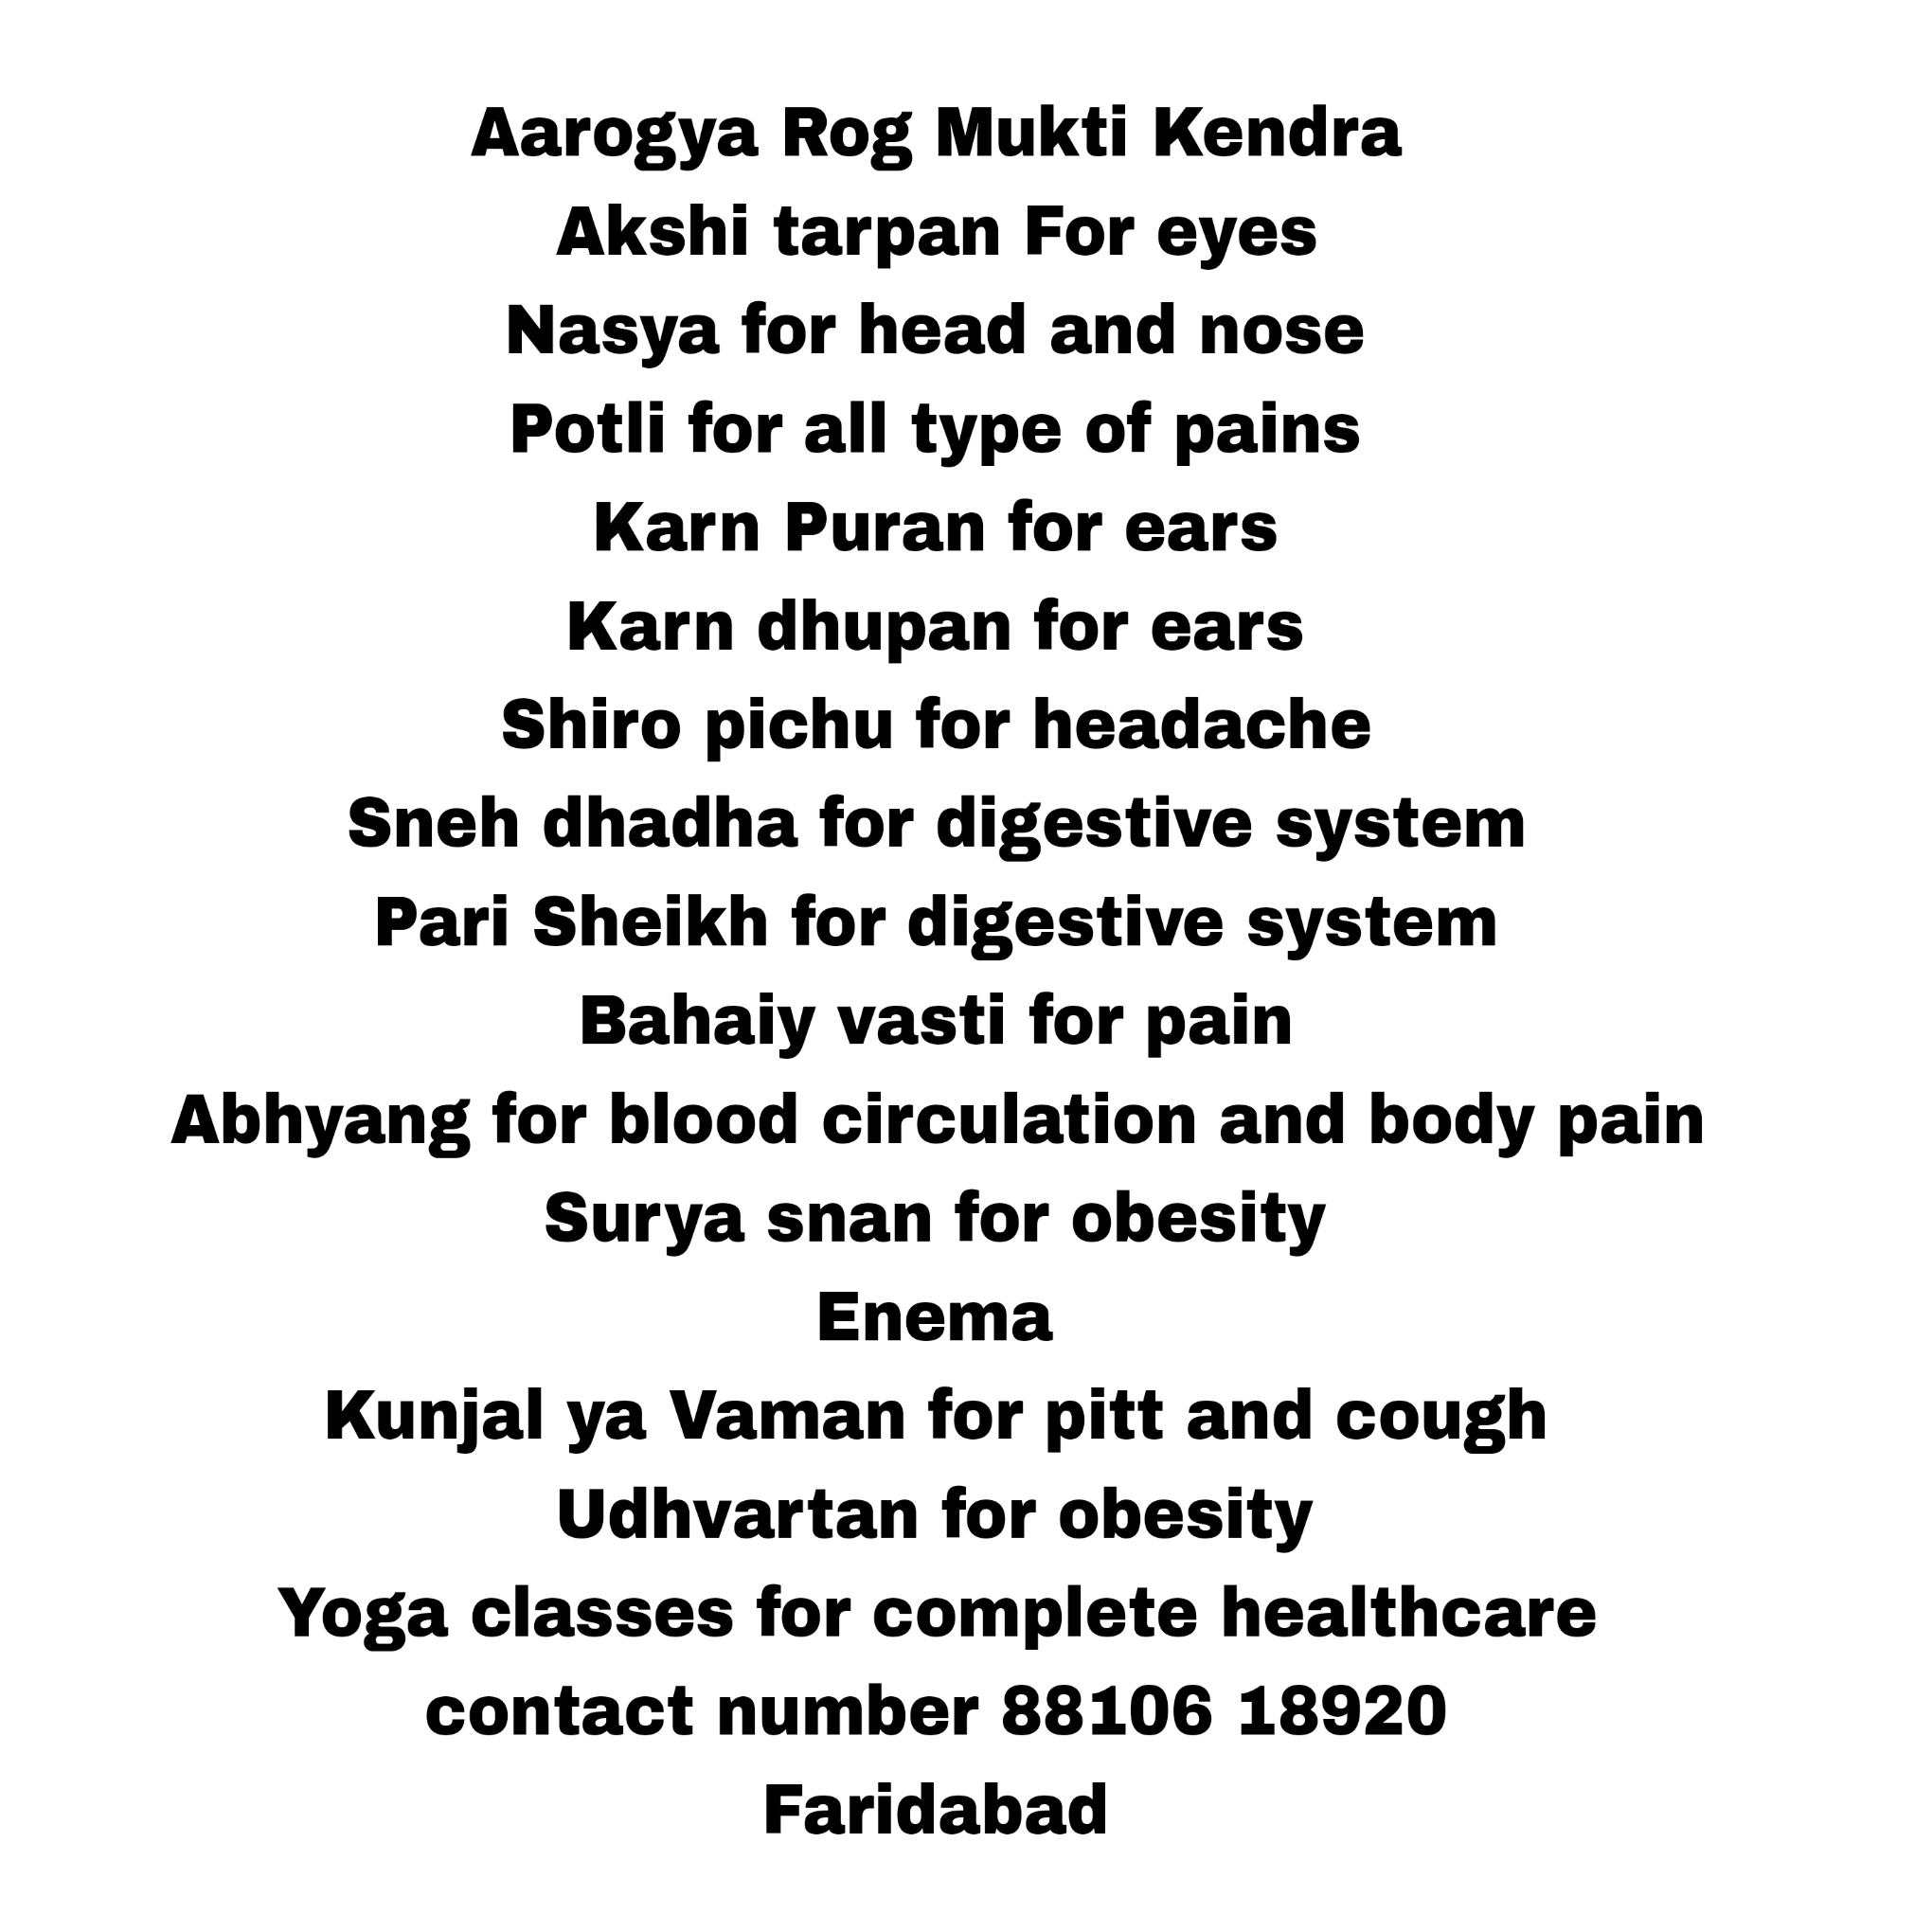 Aarogya Rog Mukti Kendra Akshi tarpan For eyes  Nasya for head and nose Potli for all type of pains Karn Puran for ears  Karn dhupan for ears  Shiro pichu for headache Sneh dhadha for digestive system  Pari Sheikh for digestive system Bahaiy vasti for pain Abhyang for blood circulation and body pain Surya snan for obesity  Enema Kunjal ya Vaman for pitt and cough  Udhvartan for obesity Yoga classes for complete healthcare contact number 88106 18920  Faridabad